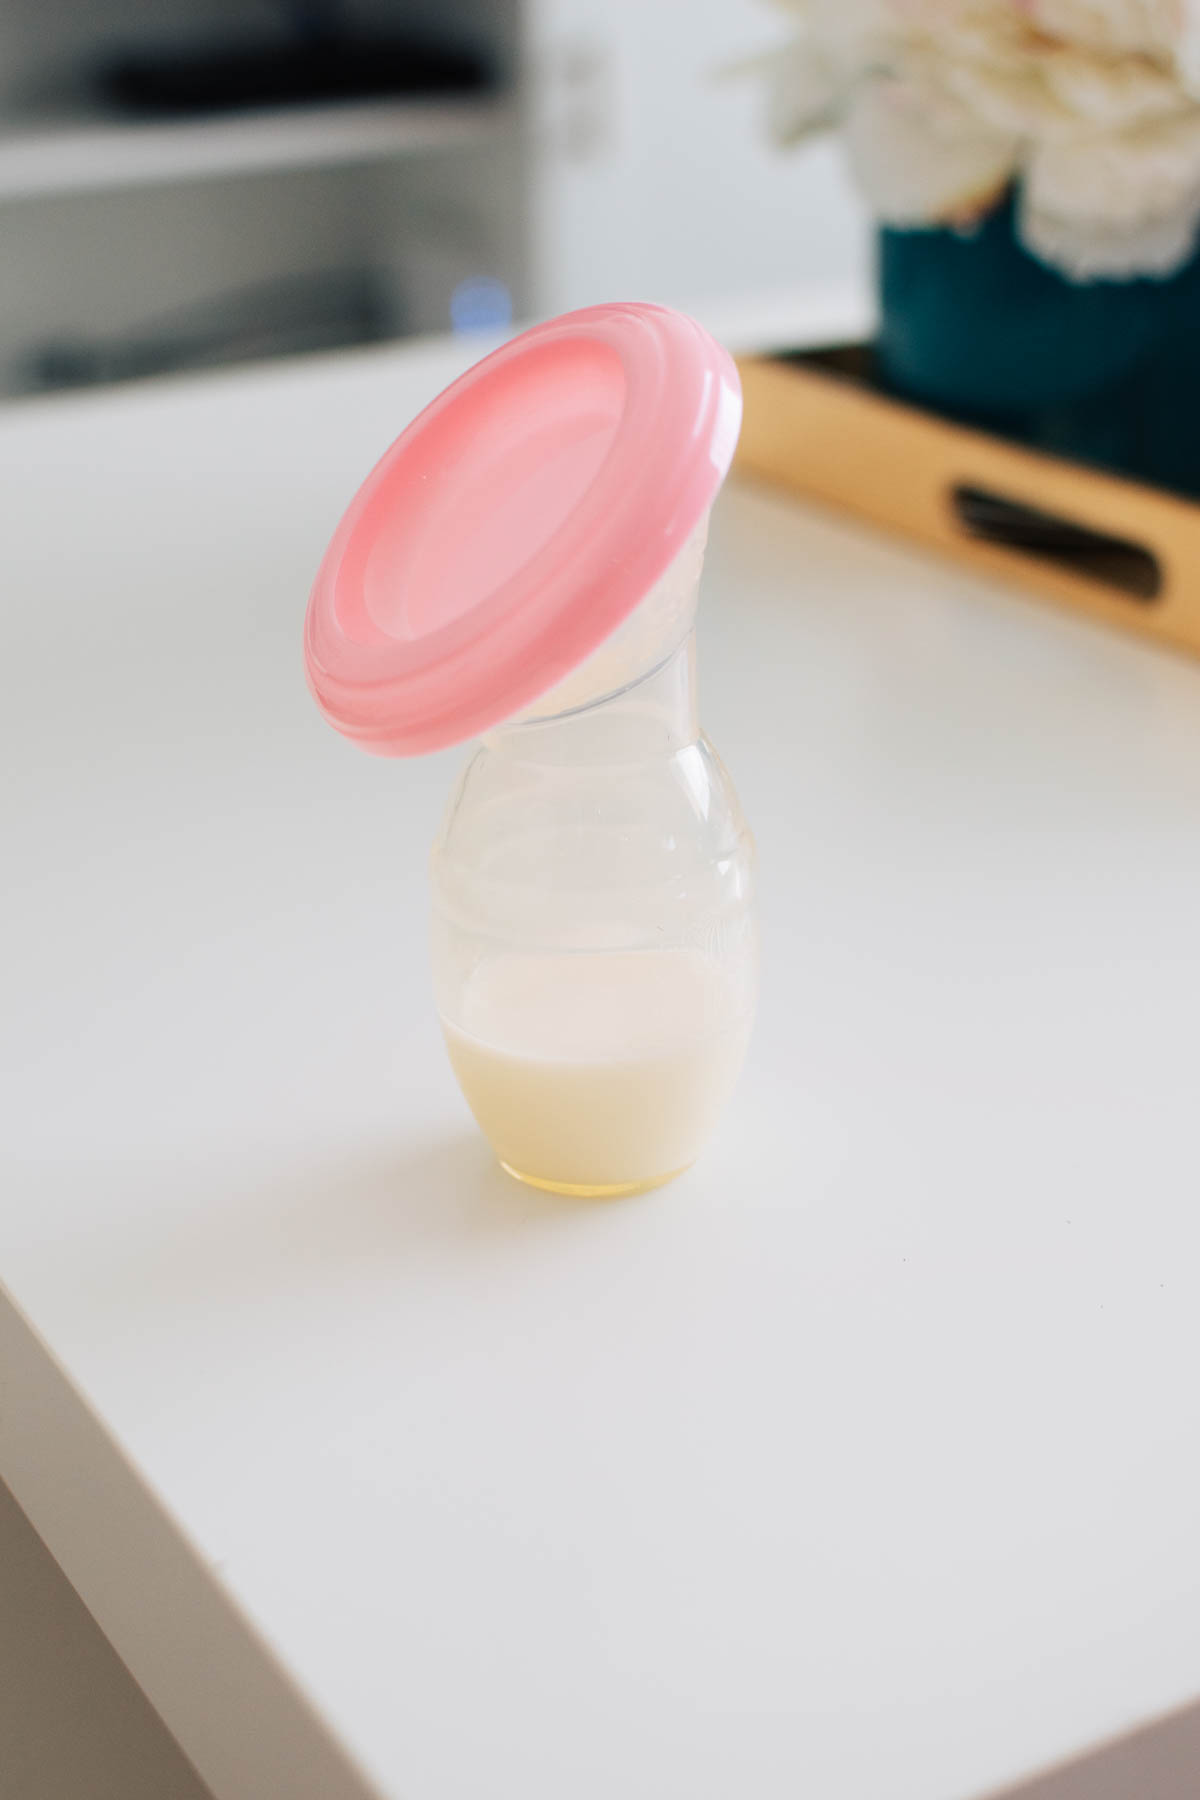 Silicone pump partly full of breast milk and covered with pink lid on white table top.